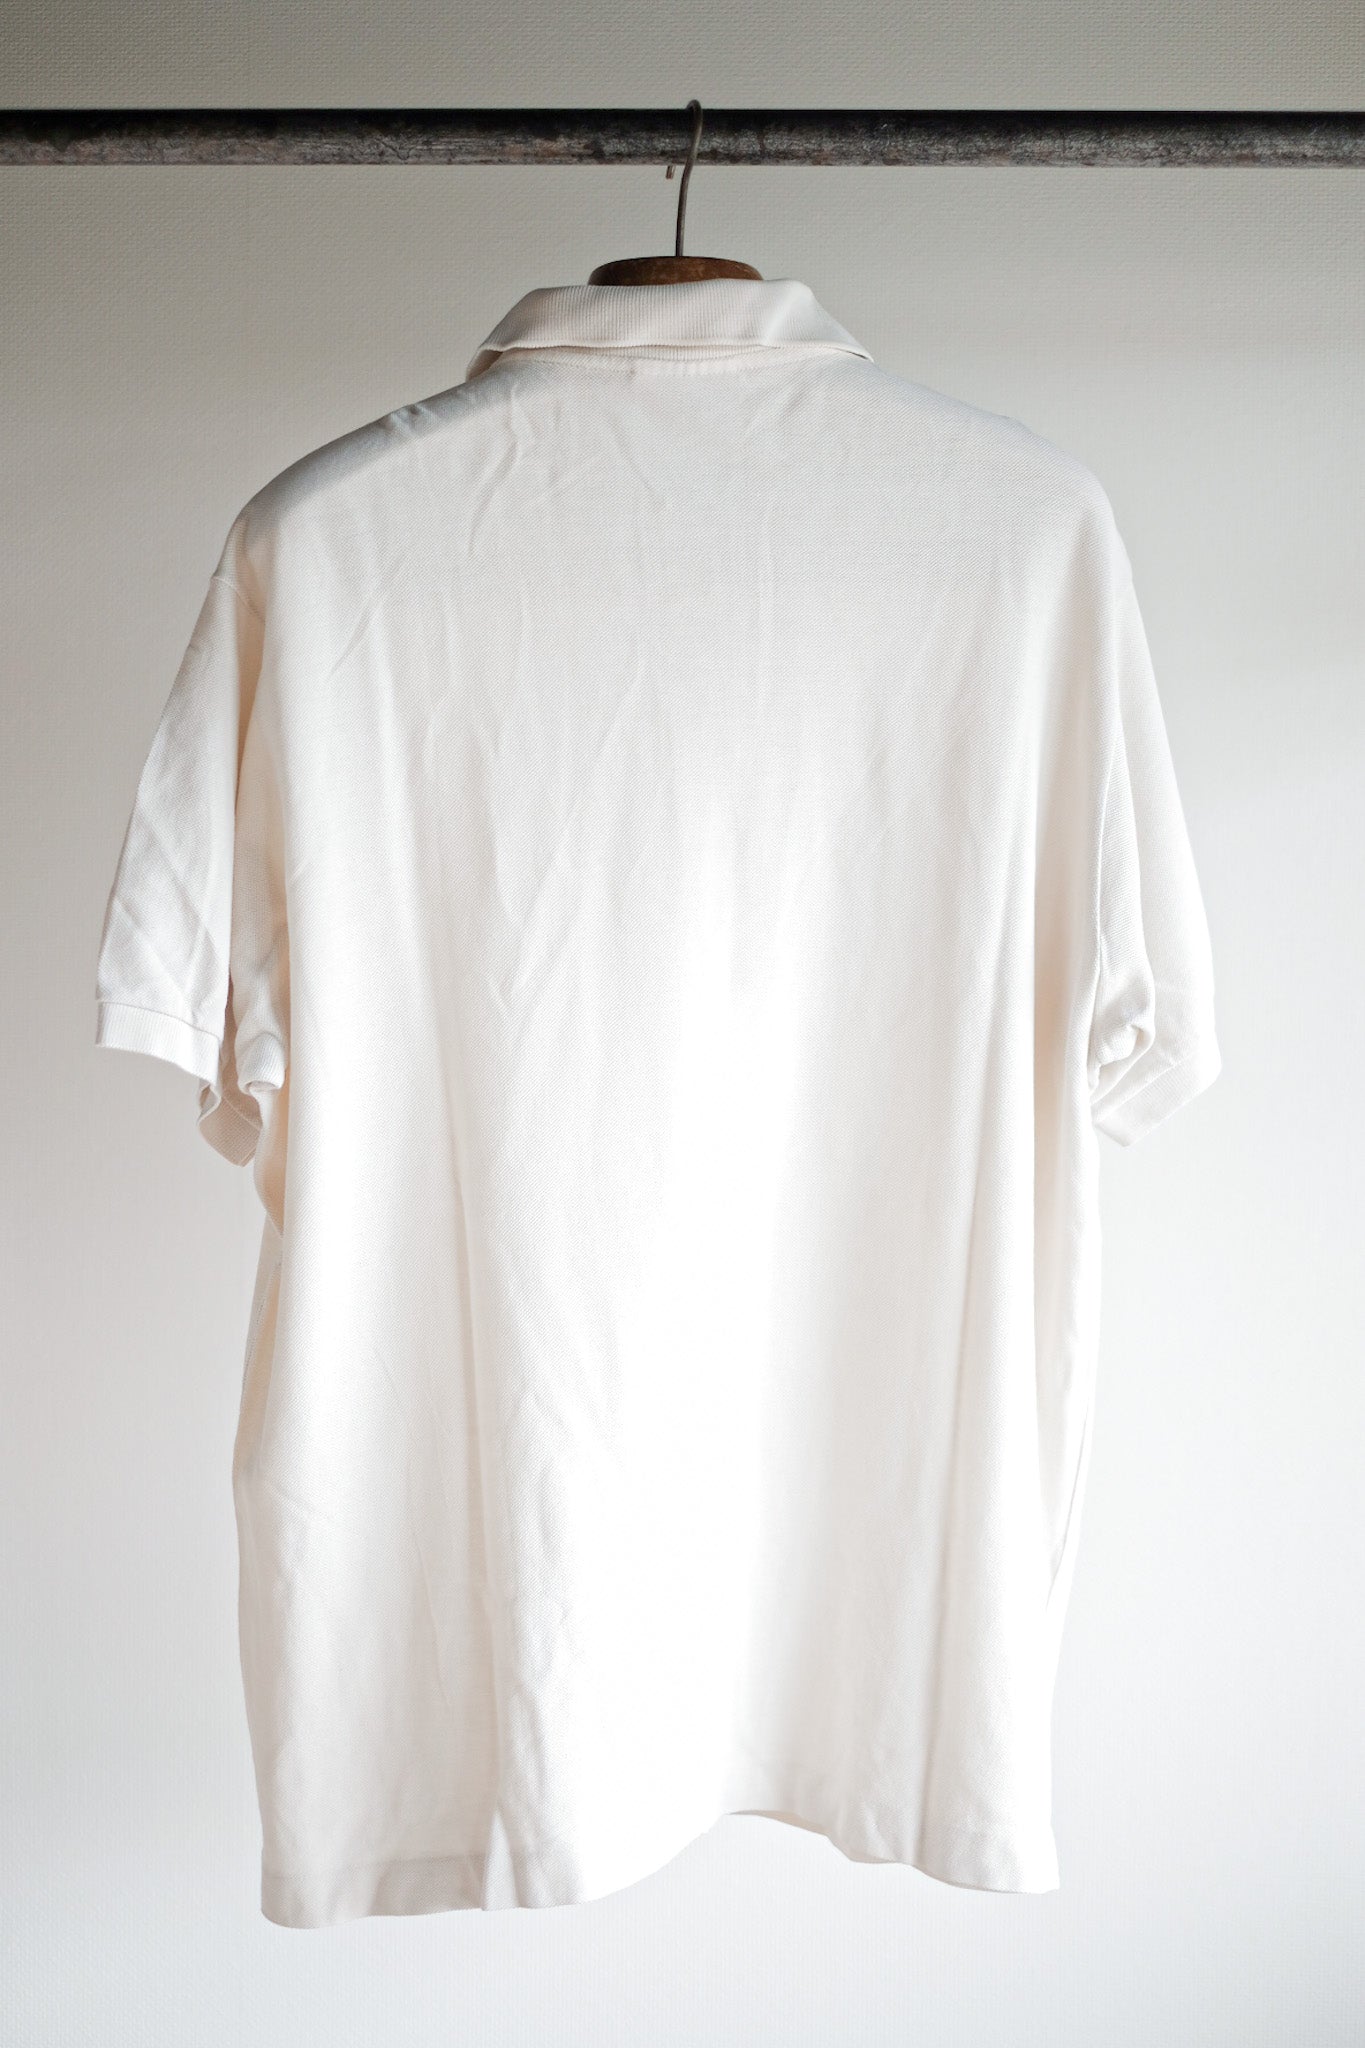 [~ 80's] CHEMISE LACOSTE S/S POLO SHIRT SIRT SIZE.7 "ECRU"